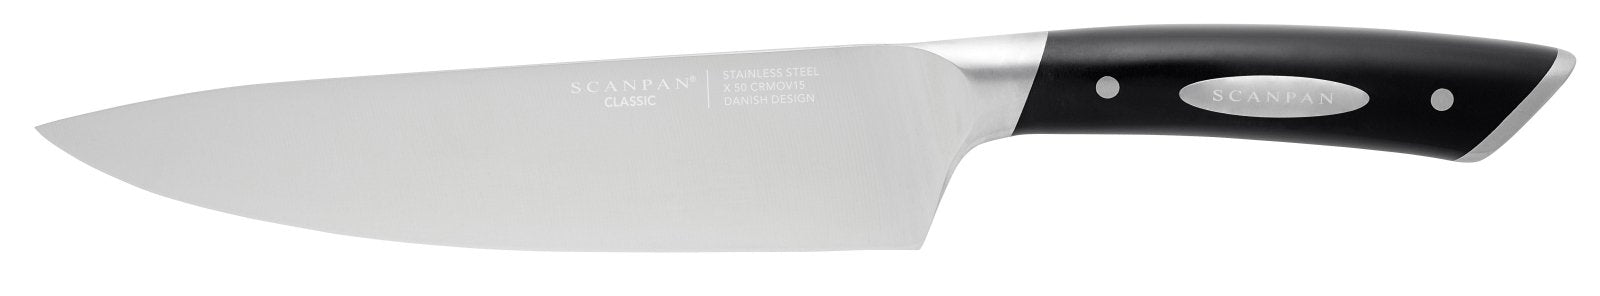 Scanpan Classic 20cm Cook's Knife - SP92502000 - The Cotswold Knife Company